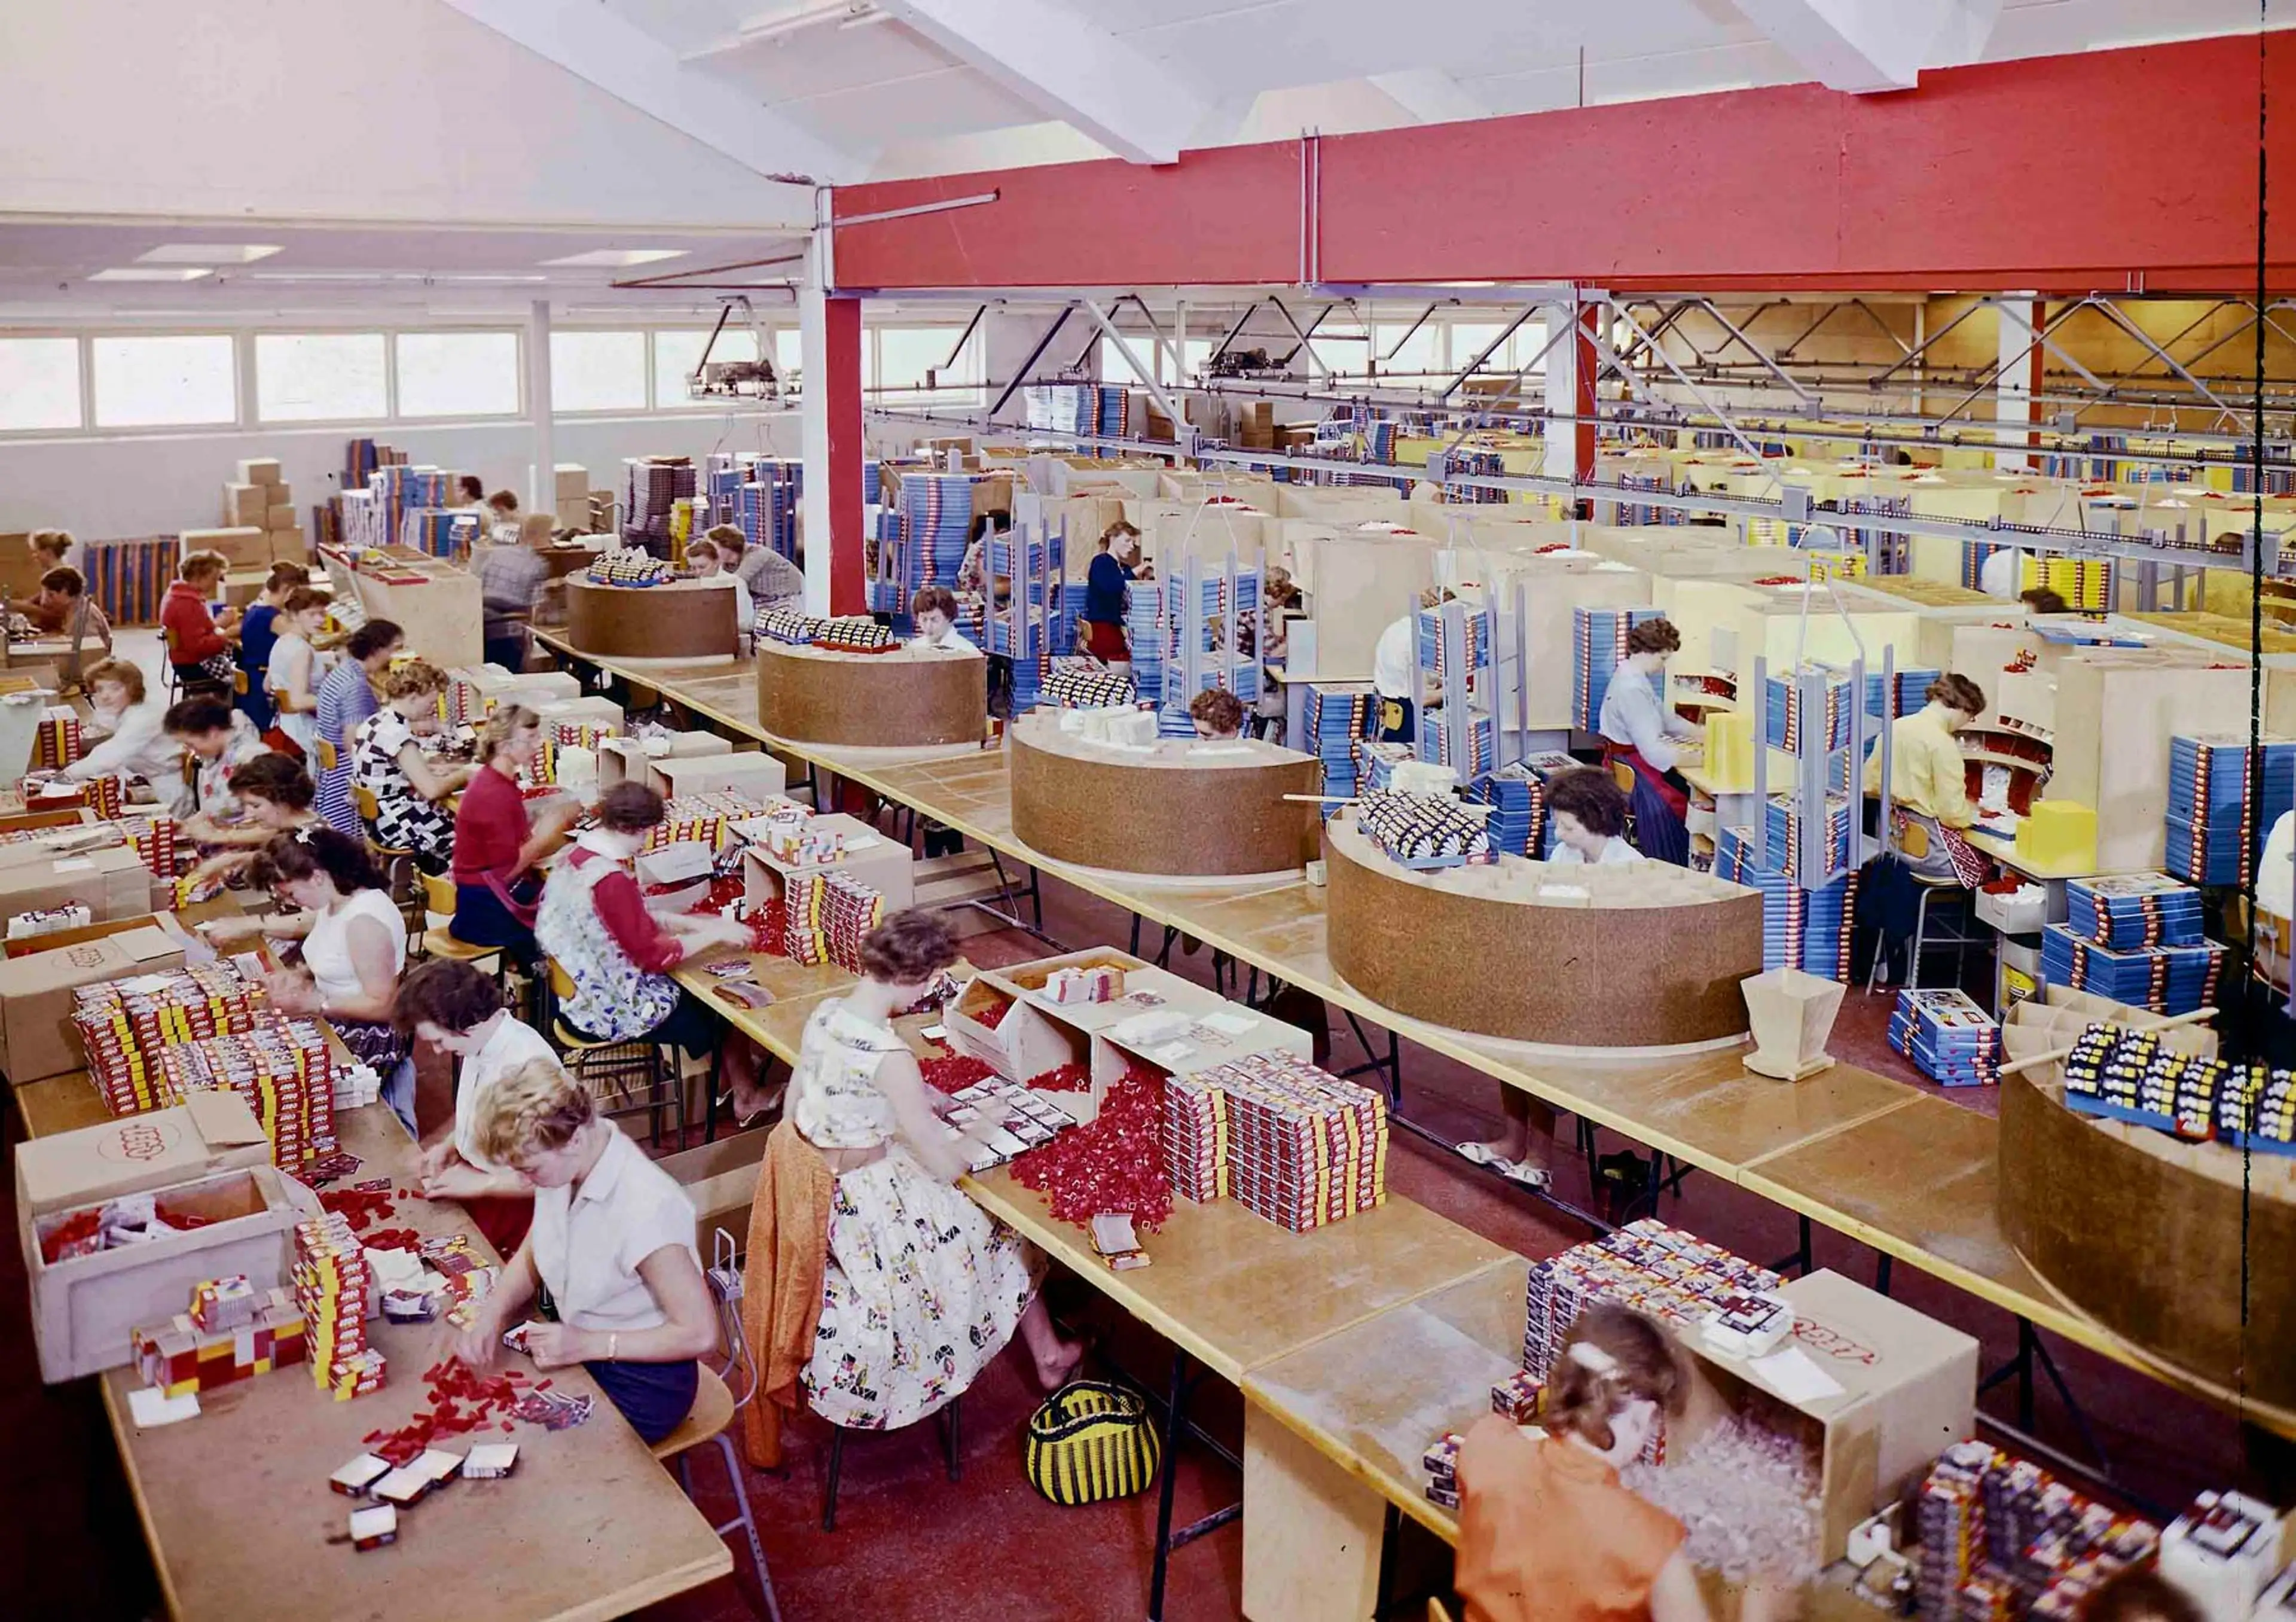 Packing line from 1961